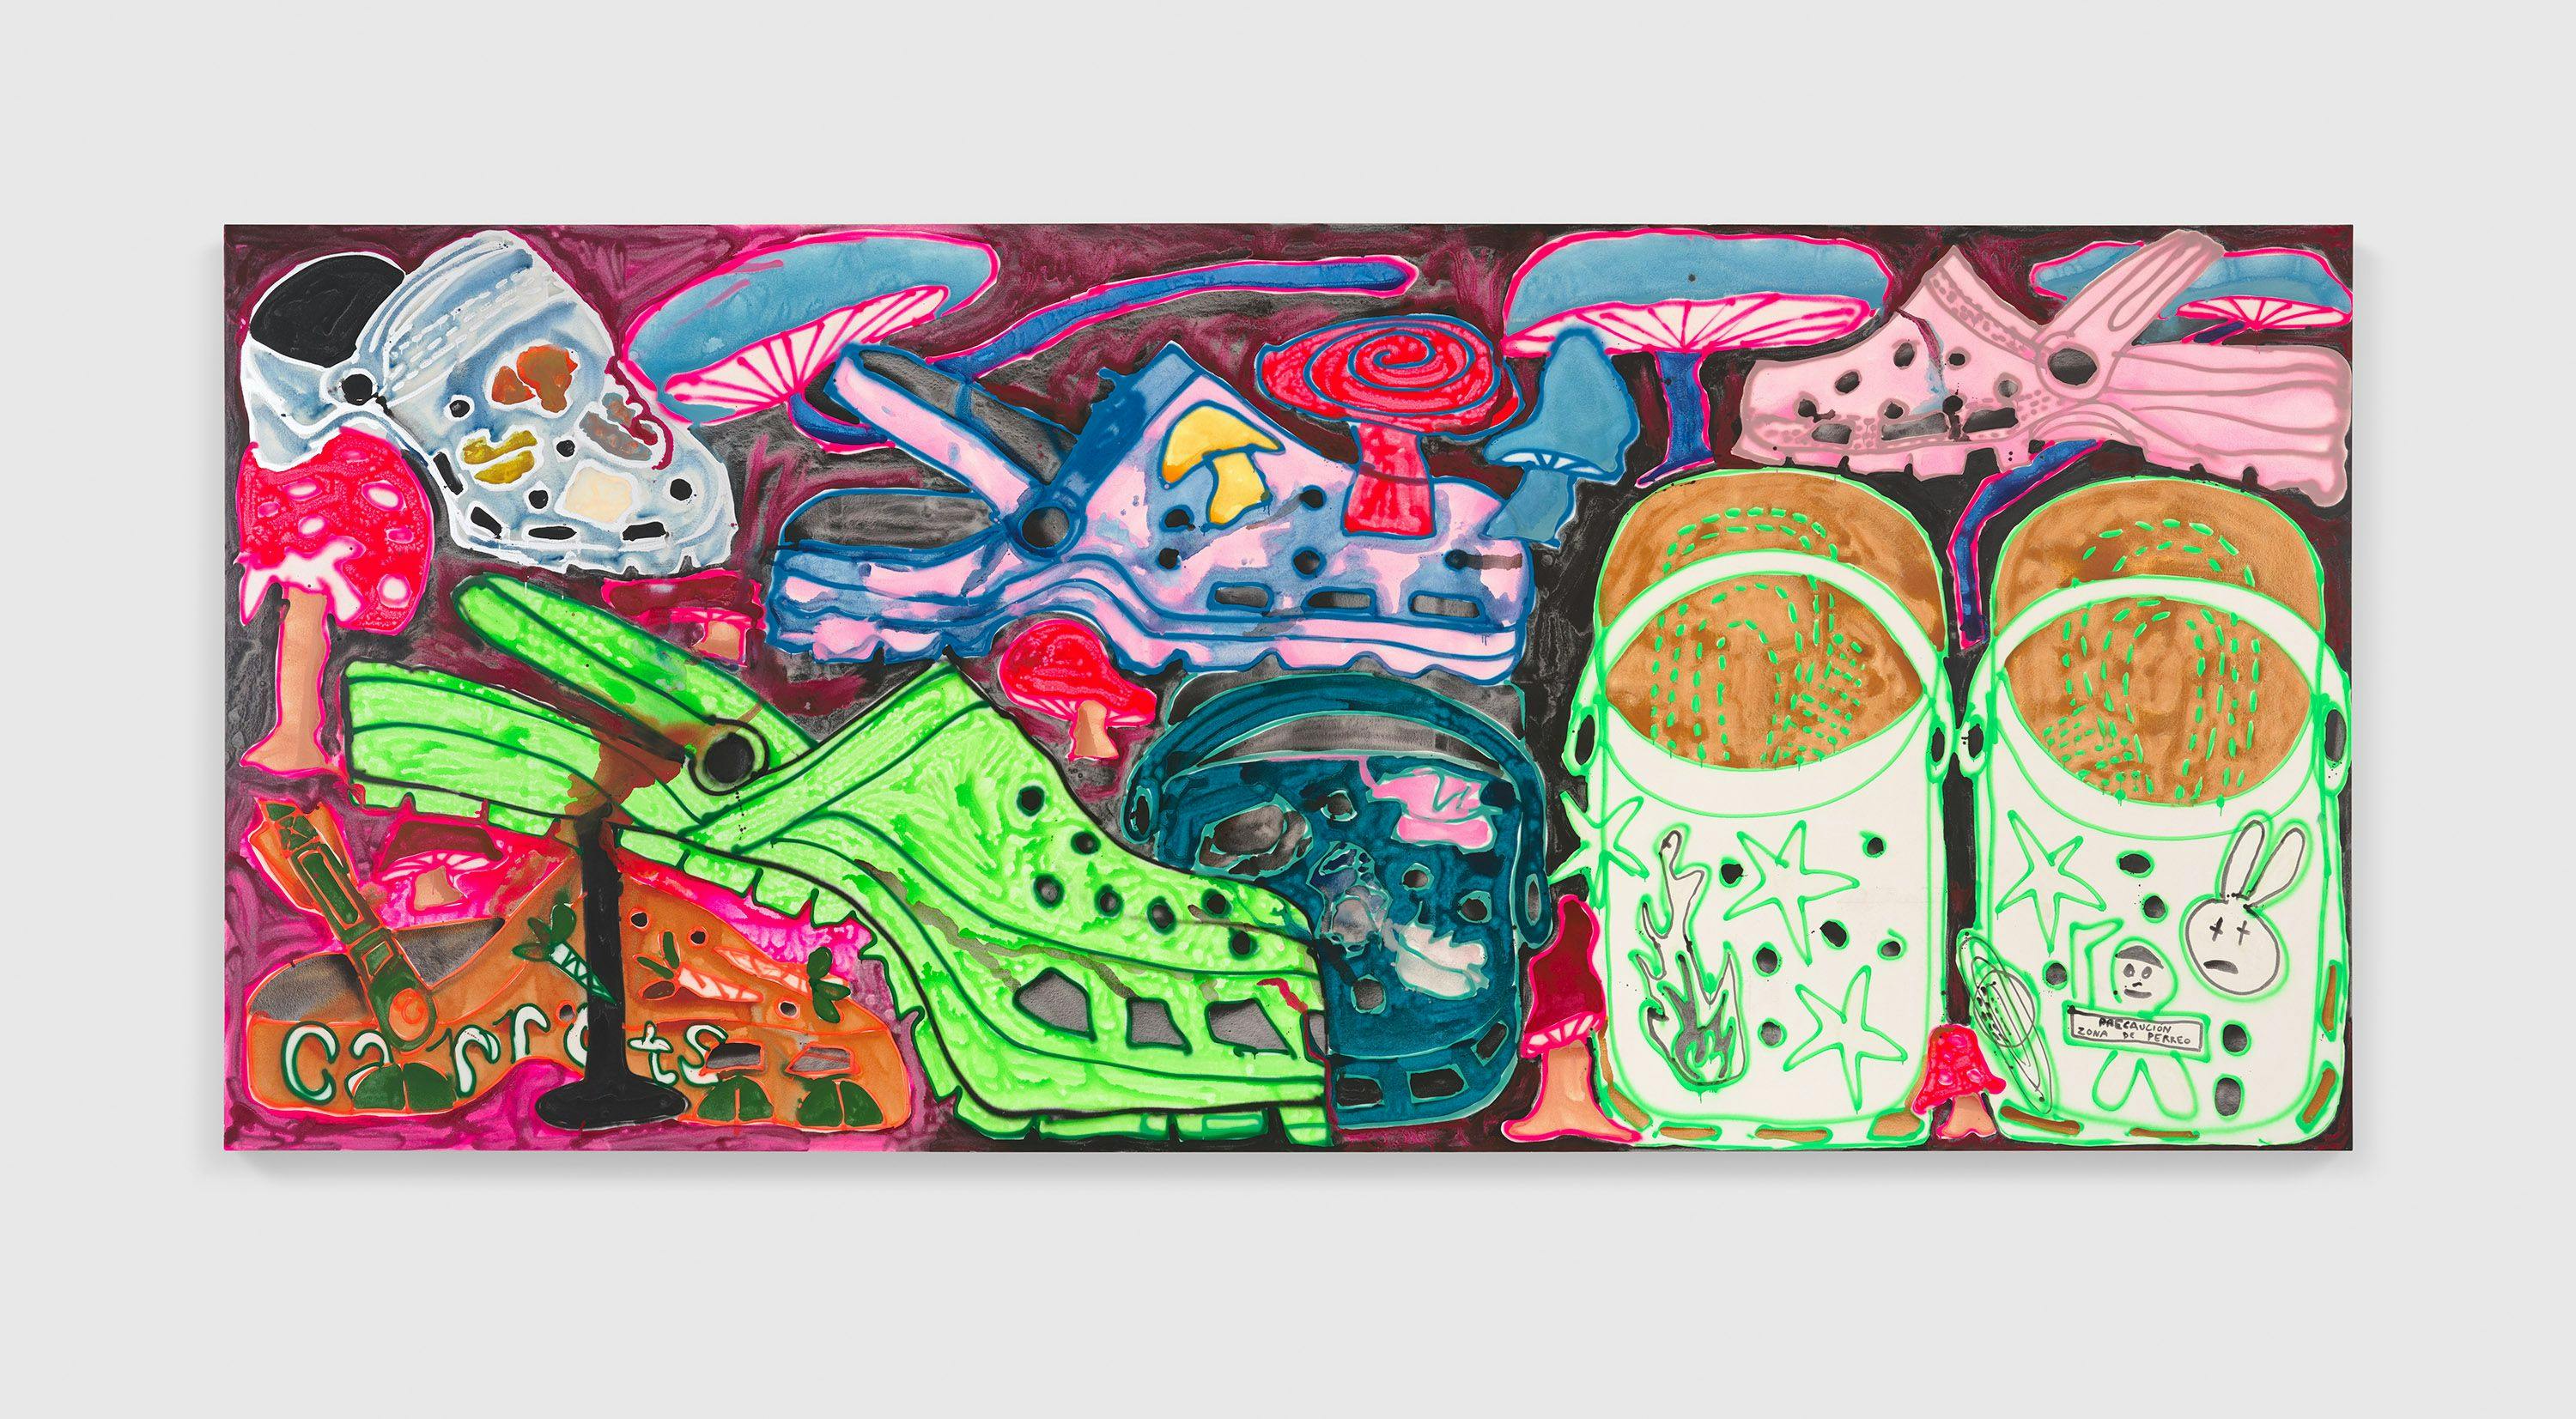 An acrylic and spray paint on canvas artwork by Katherine Bernhardt, titled Crocs World, dated 2022.